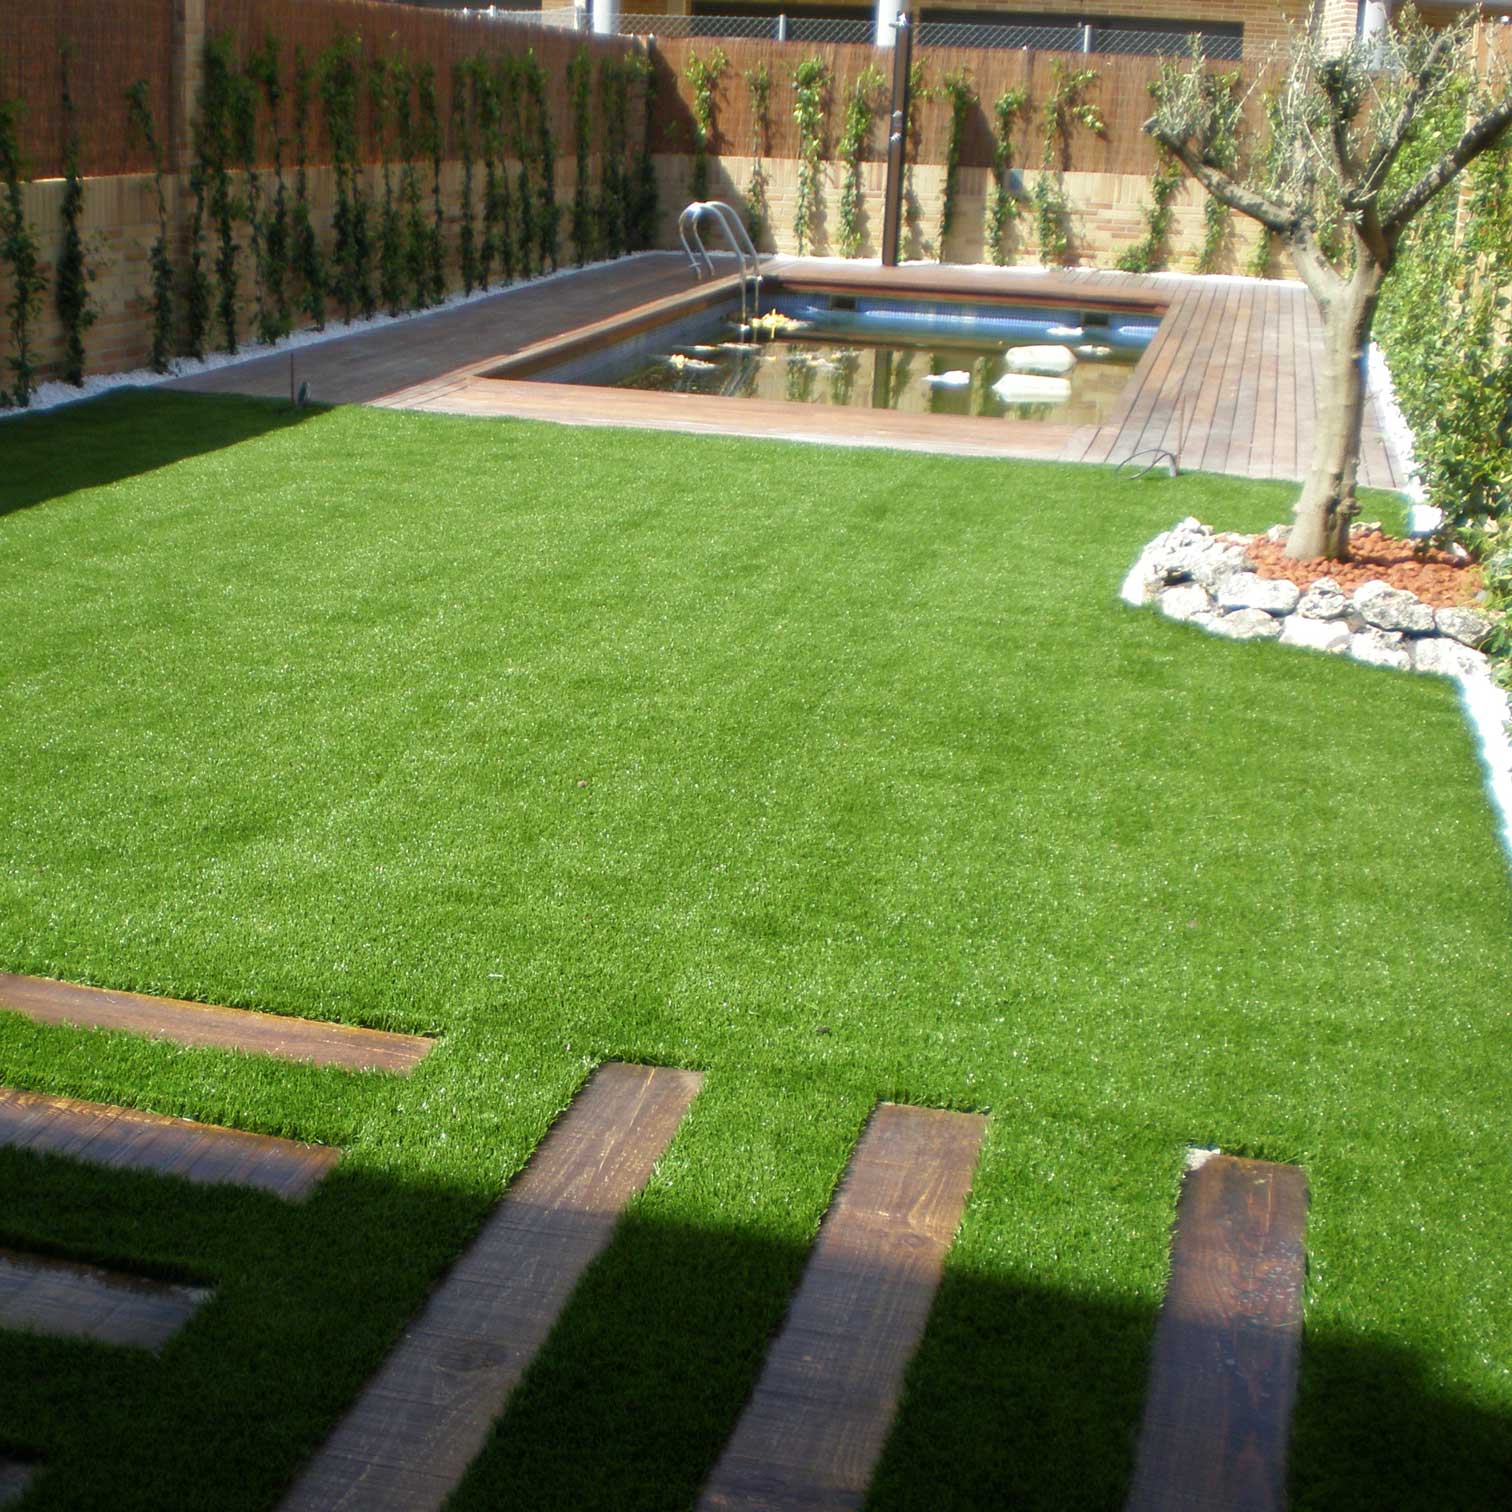 Césped artificial en Madrid - Real Turf1512 x 1512